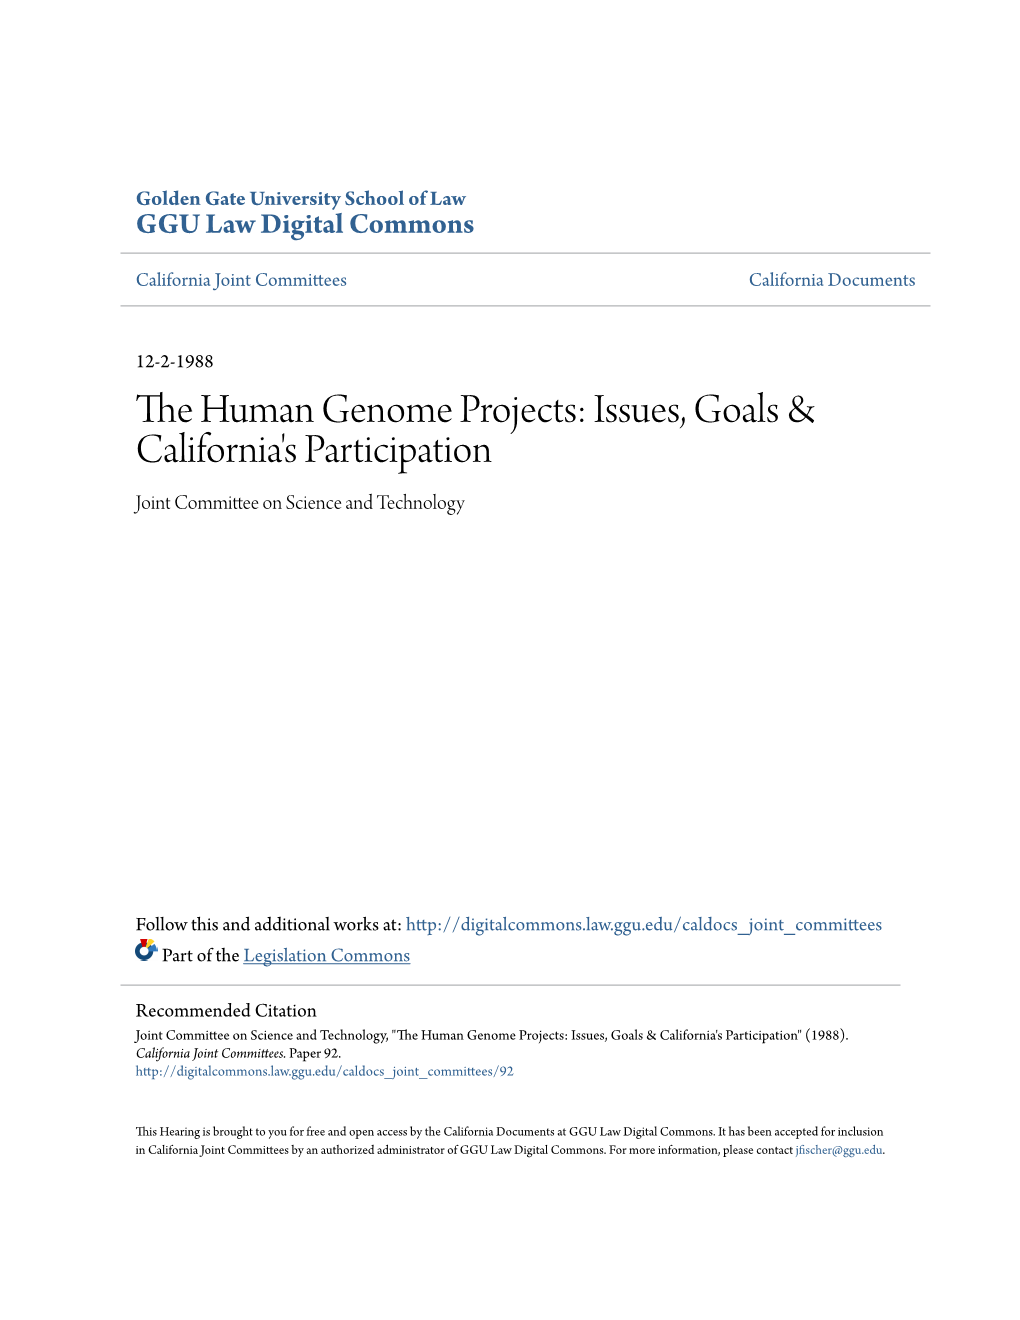 The Human Genome Projects